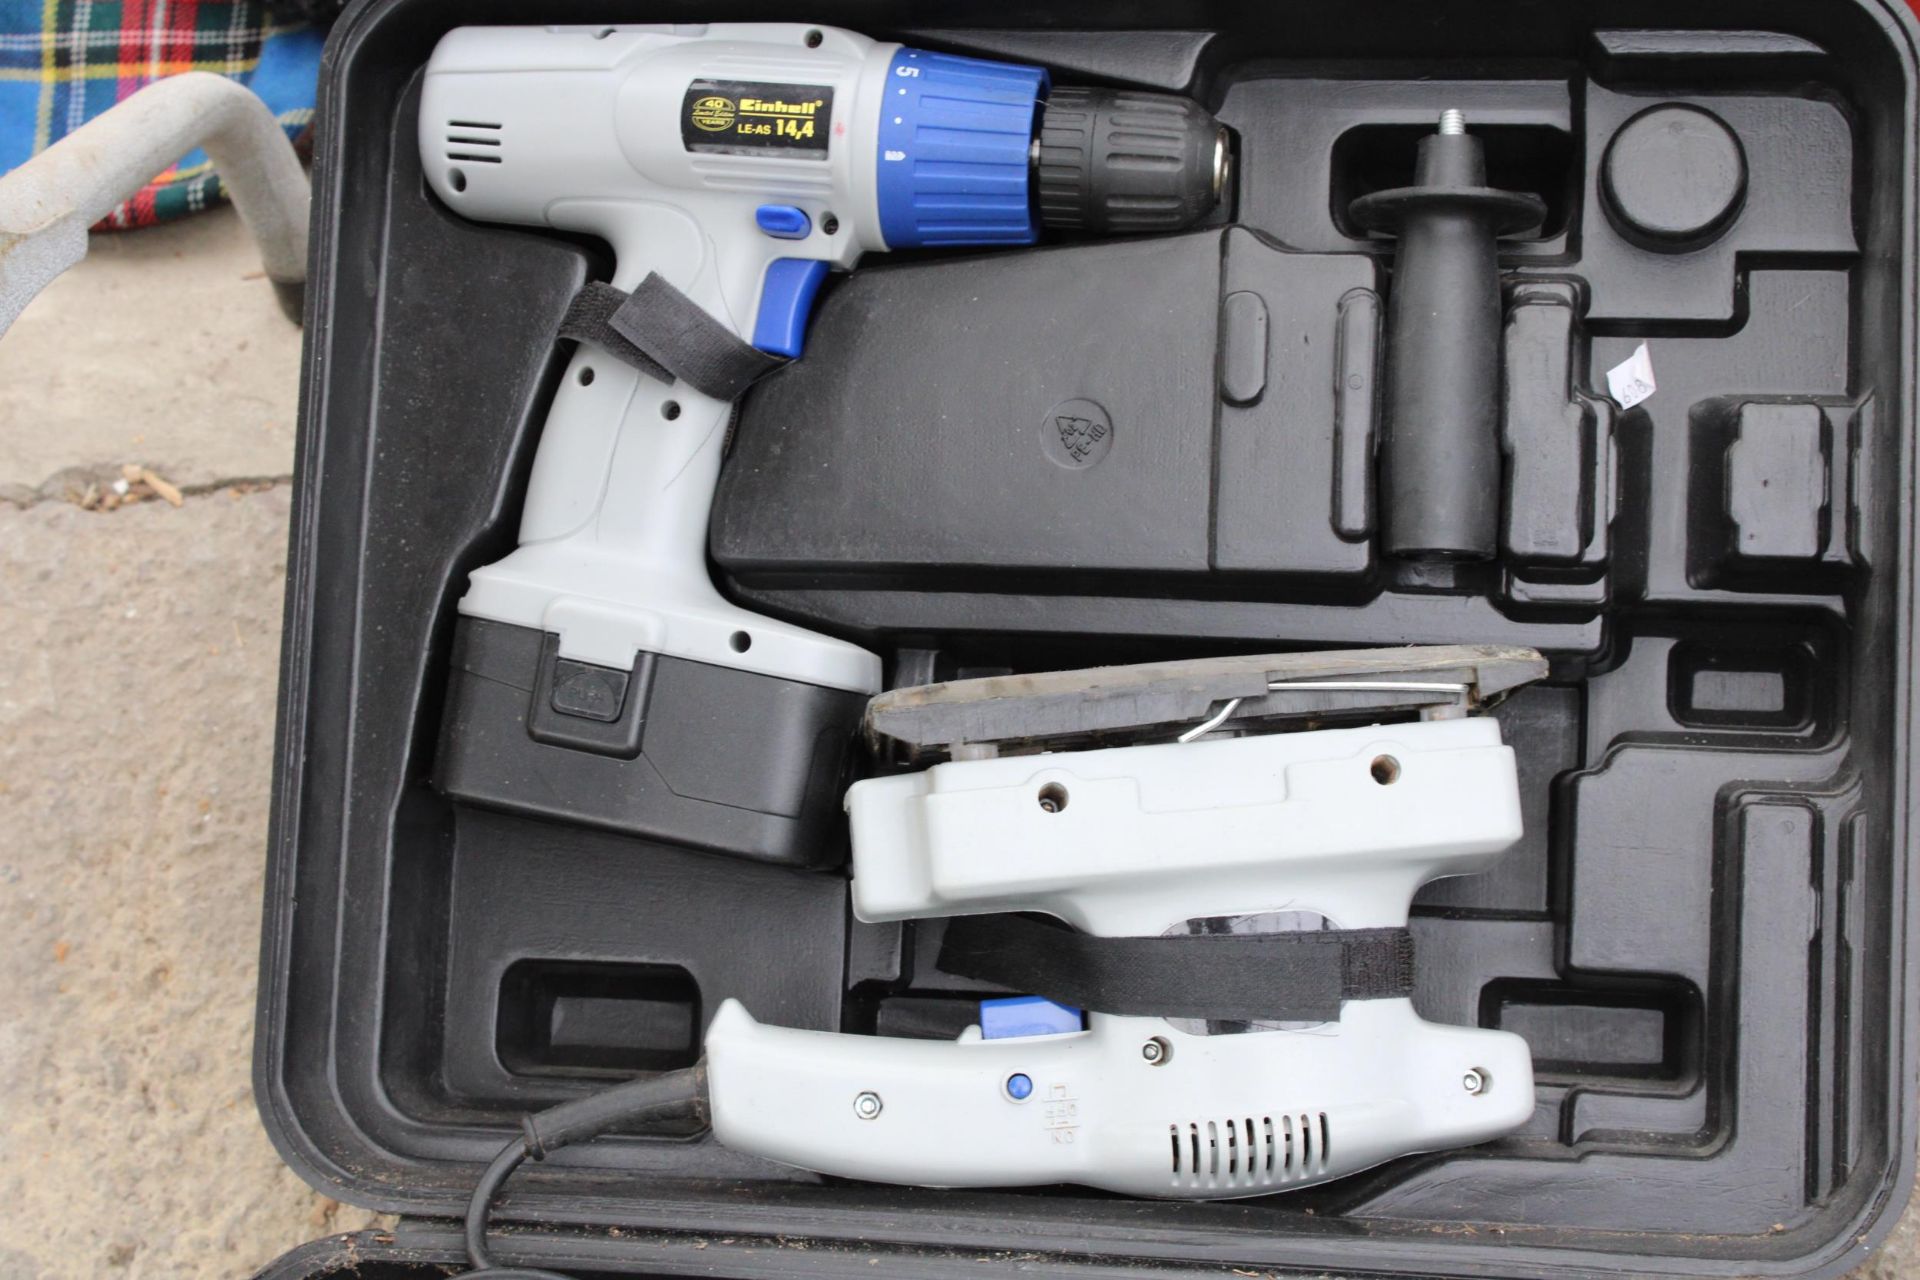 A CASED EINHELL POWER TOOL SET COMPRISING OF A JIGSAW, SANDER, DRILL AND GRINDER - Image 2 of 3